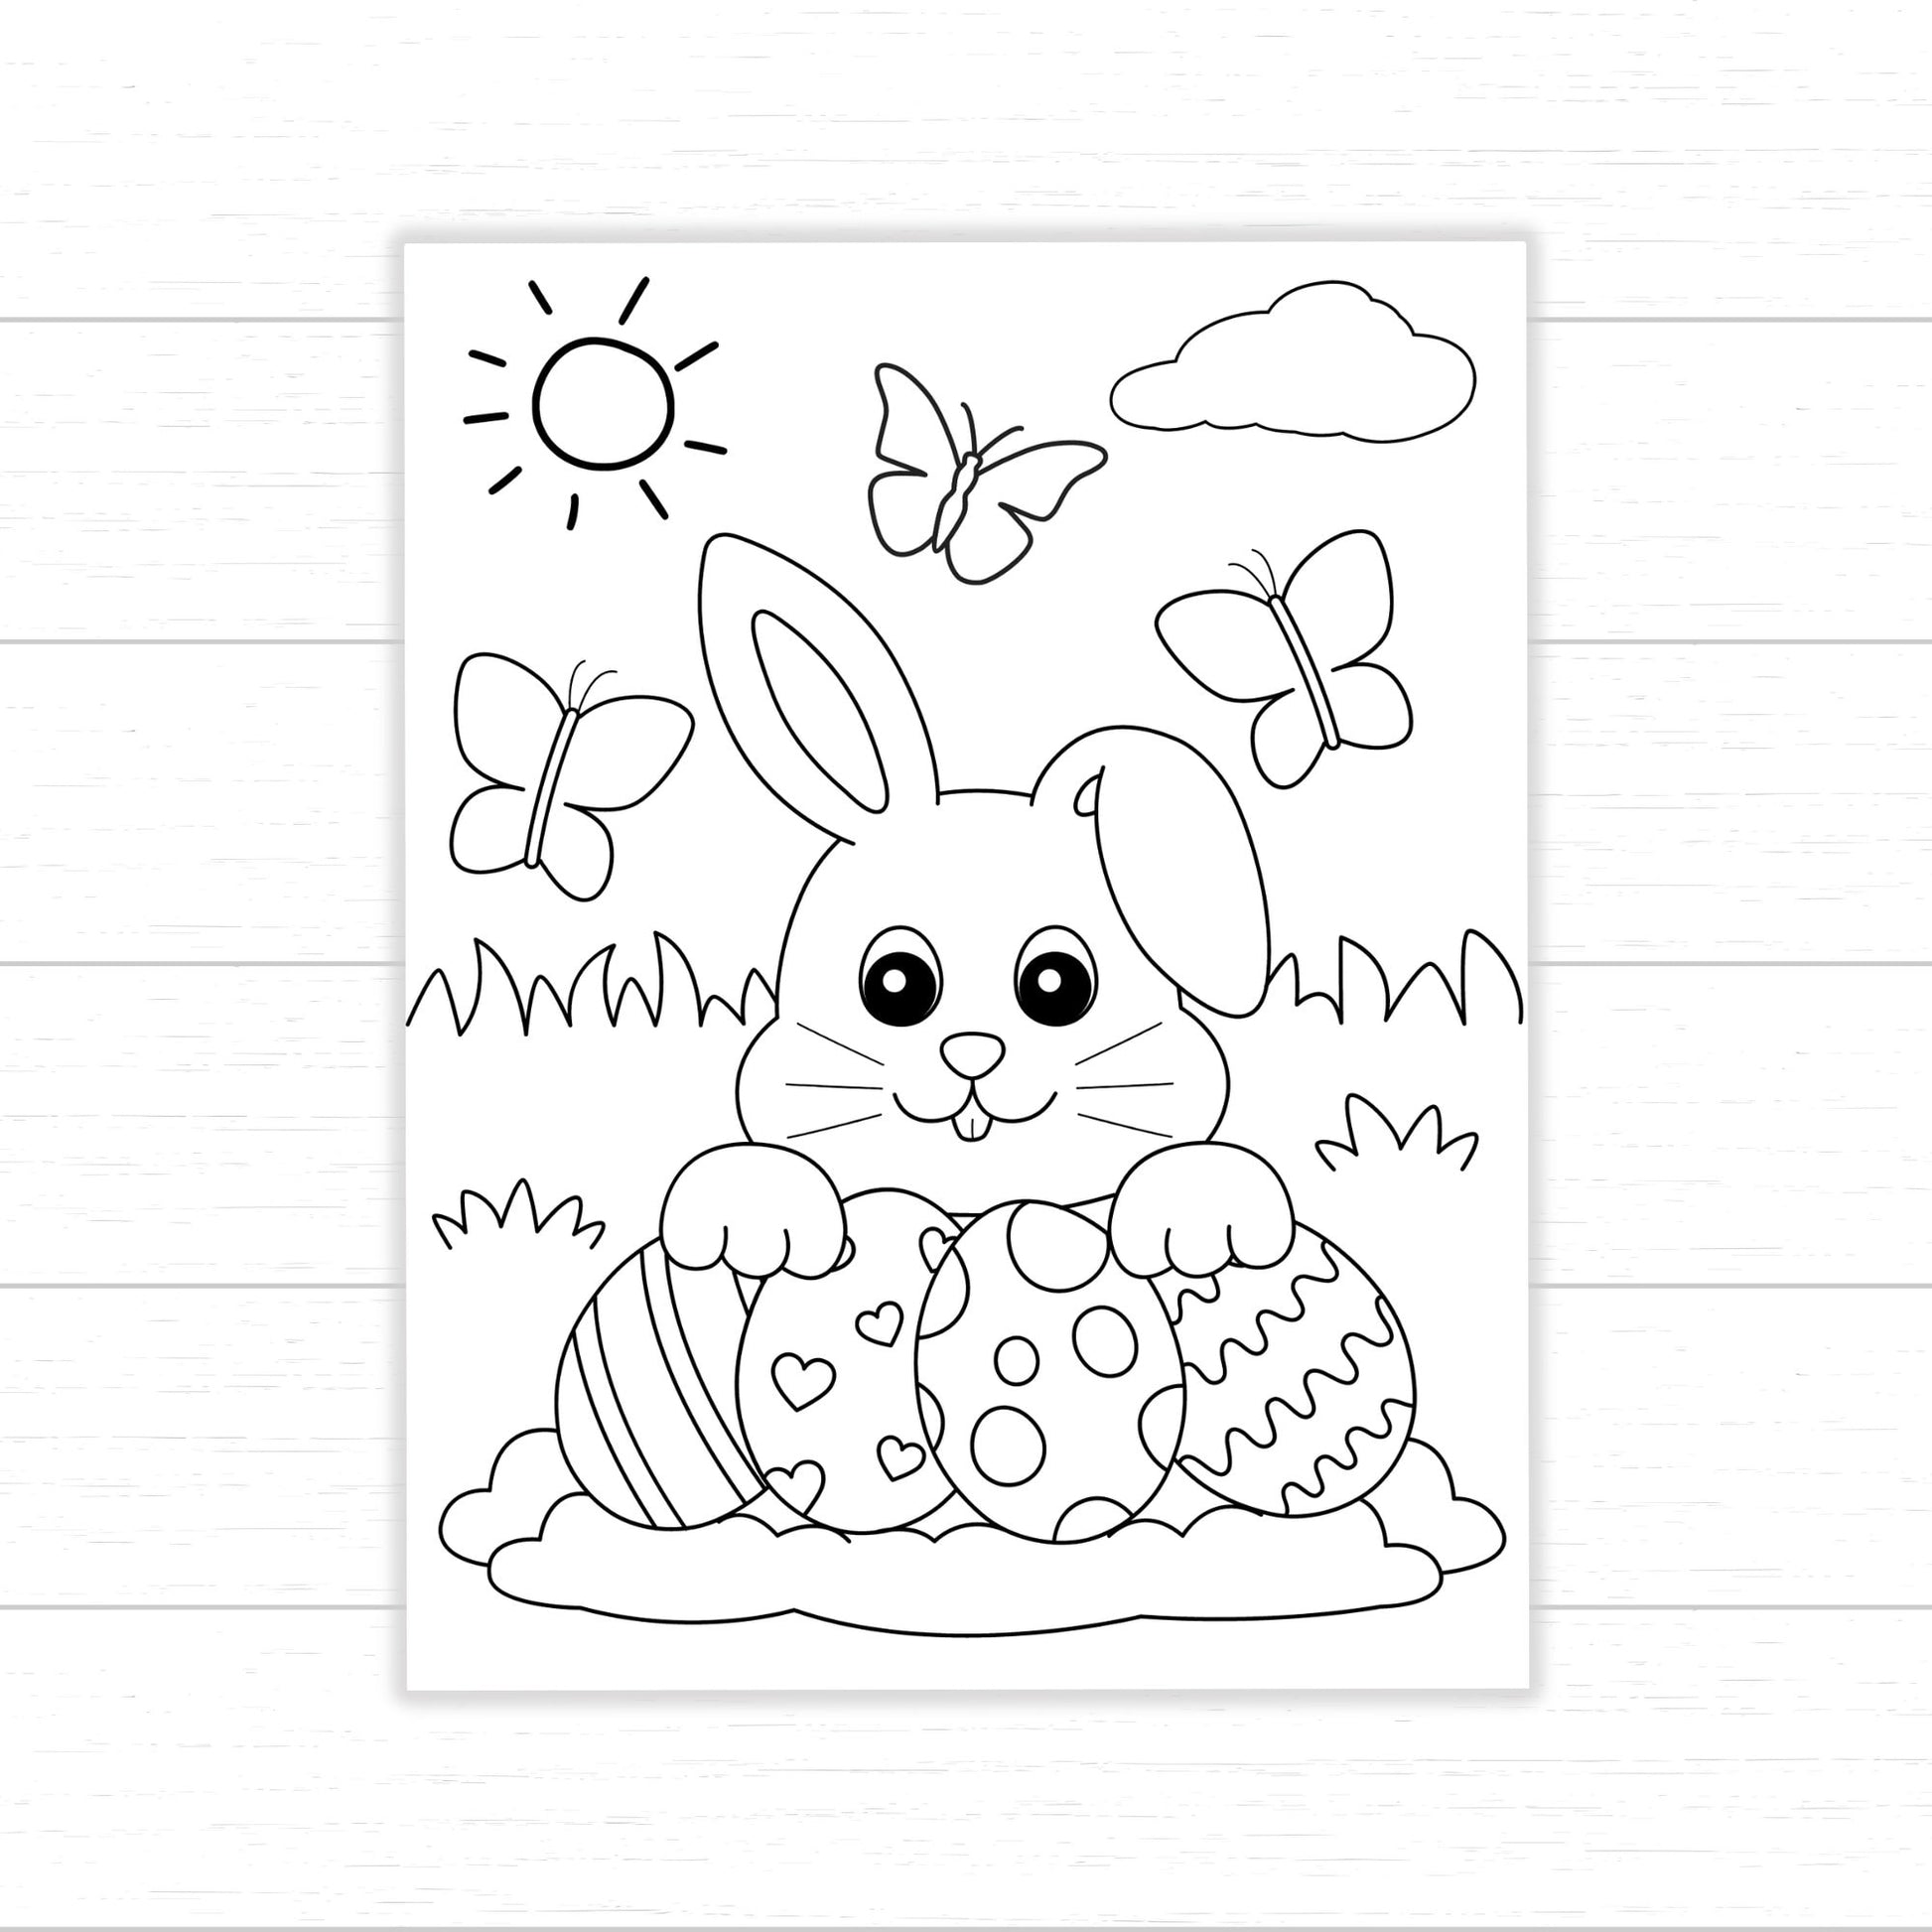 Easter Bunny Coloring Pages, Spring Coloring Pages, Easter Activities for Kids, Easter Coloring, Bunny Activities, Rabbit Coloring Pages